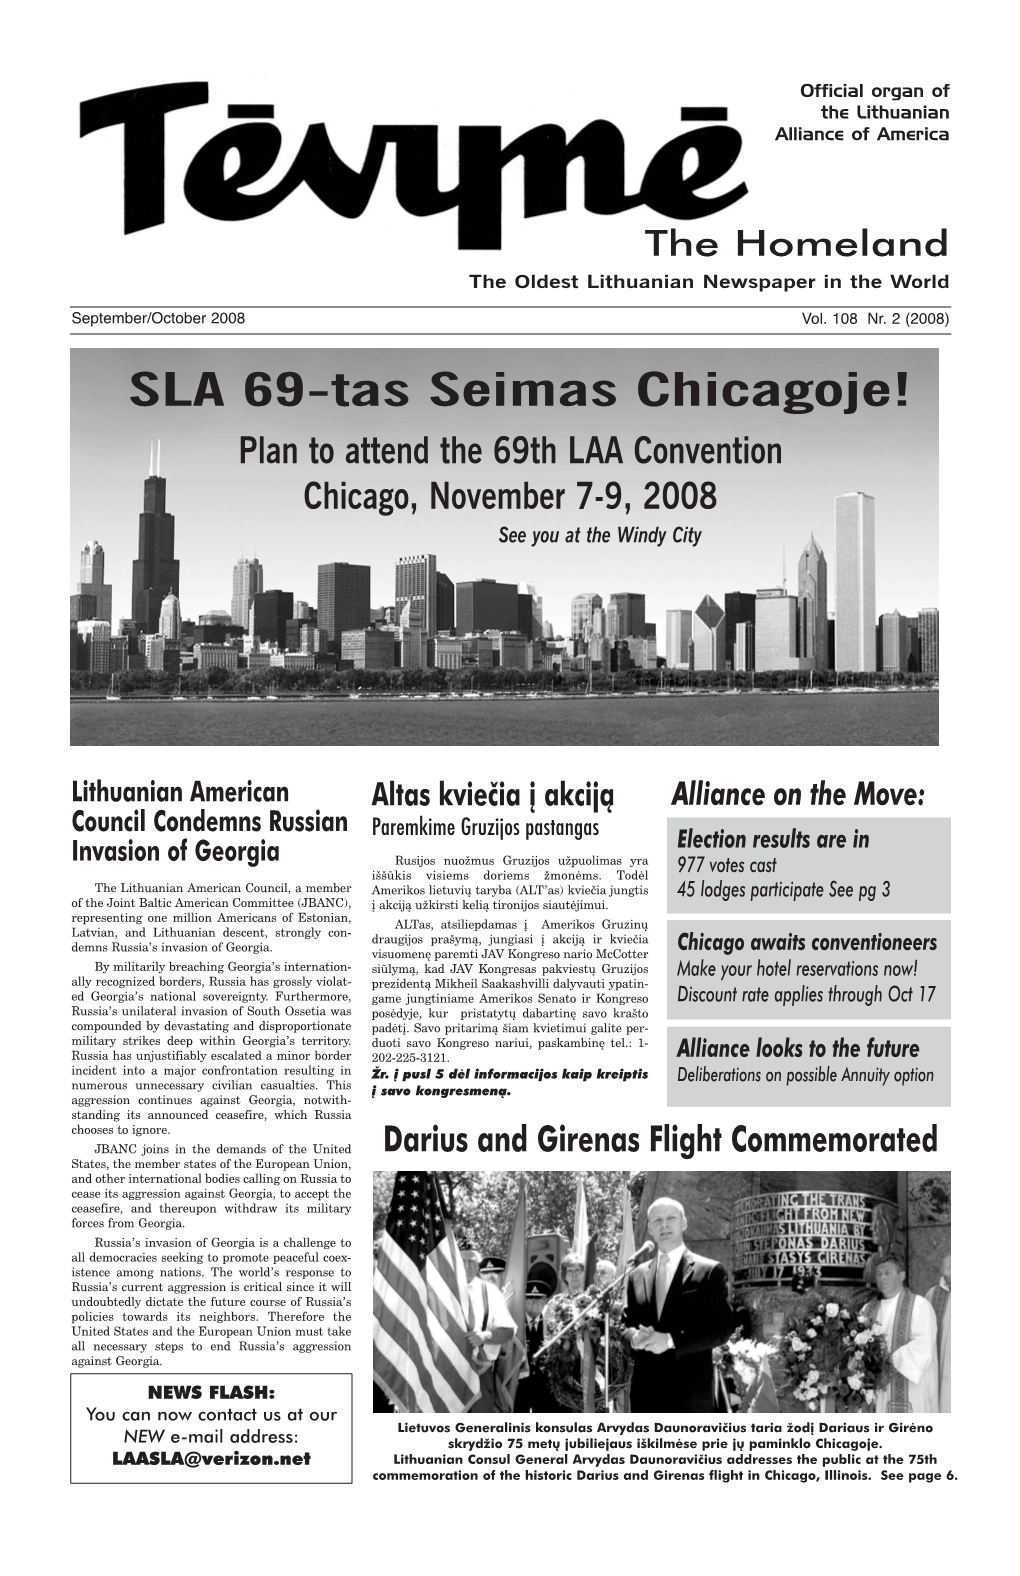 SLA 69-Tas Seimas Chicagoje! Plan to Attend the 69Th LAA Convention Chicago, November 7-9, 2008 See You at the Windy City